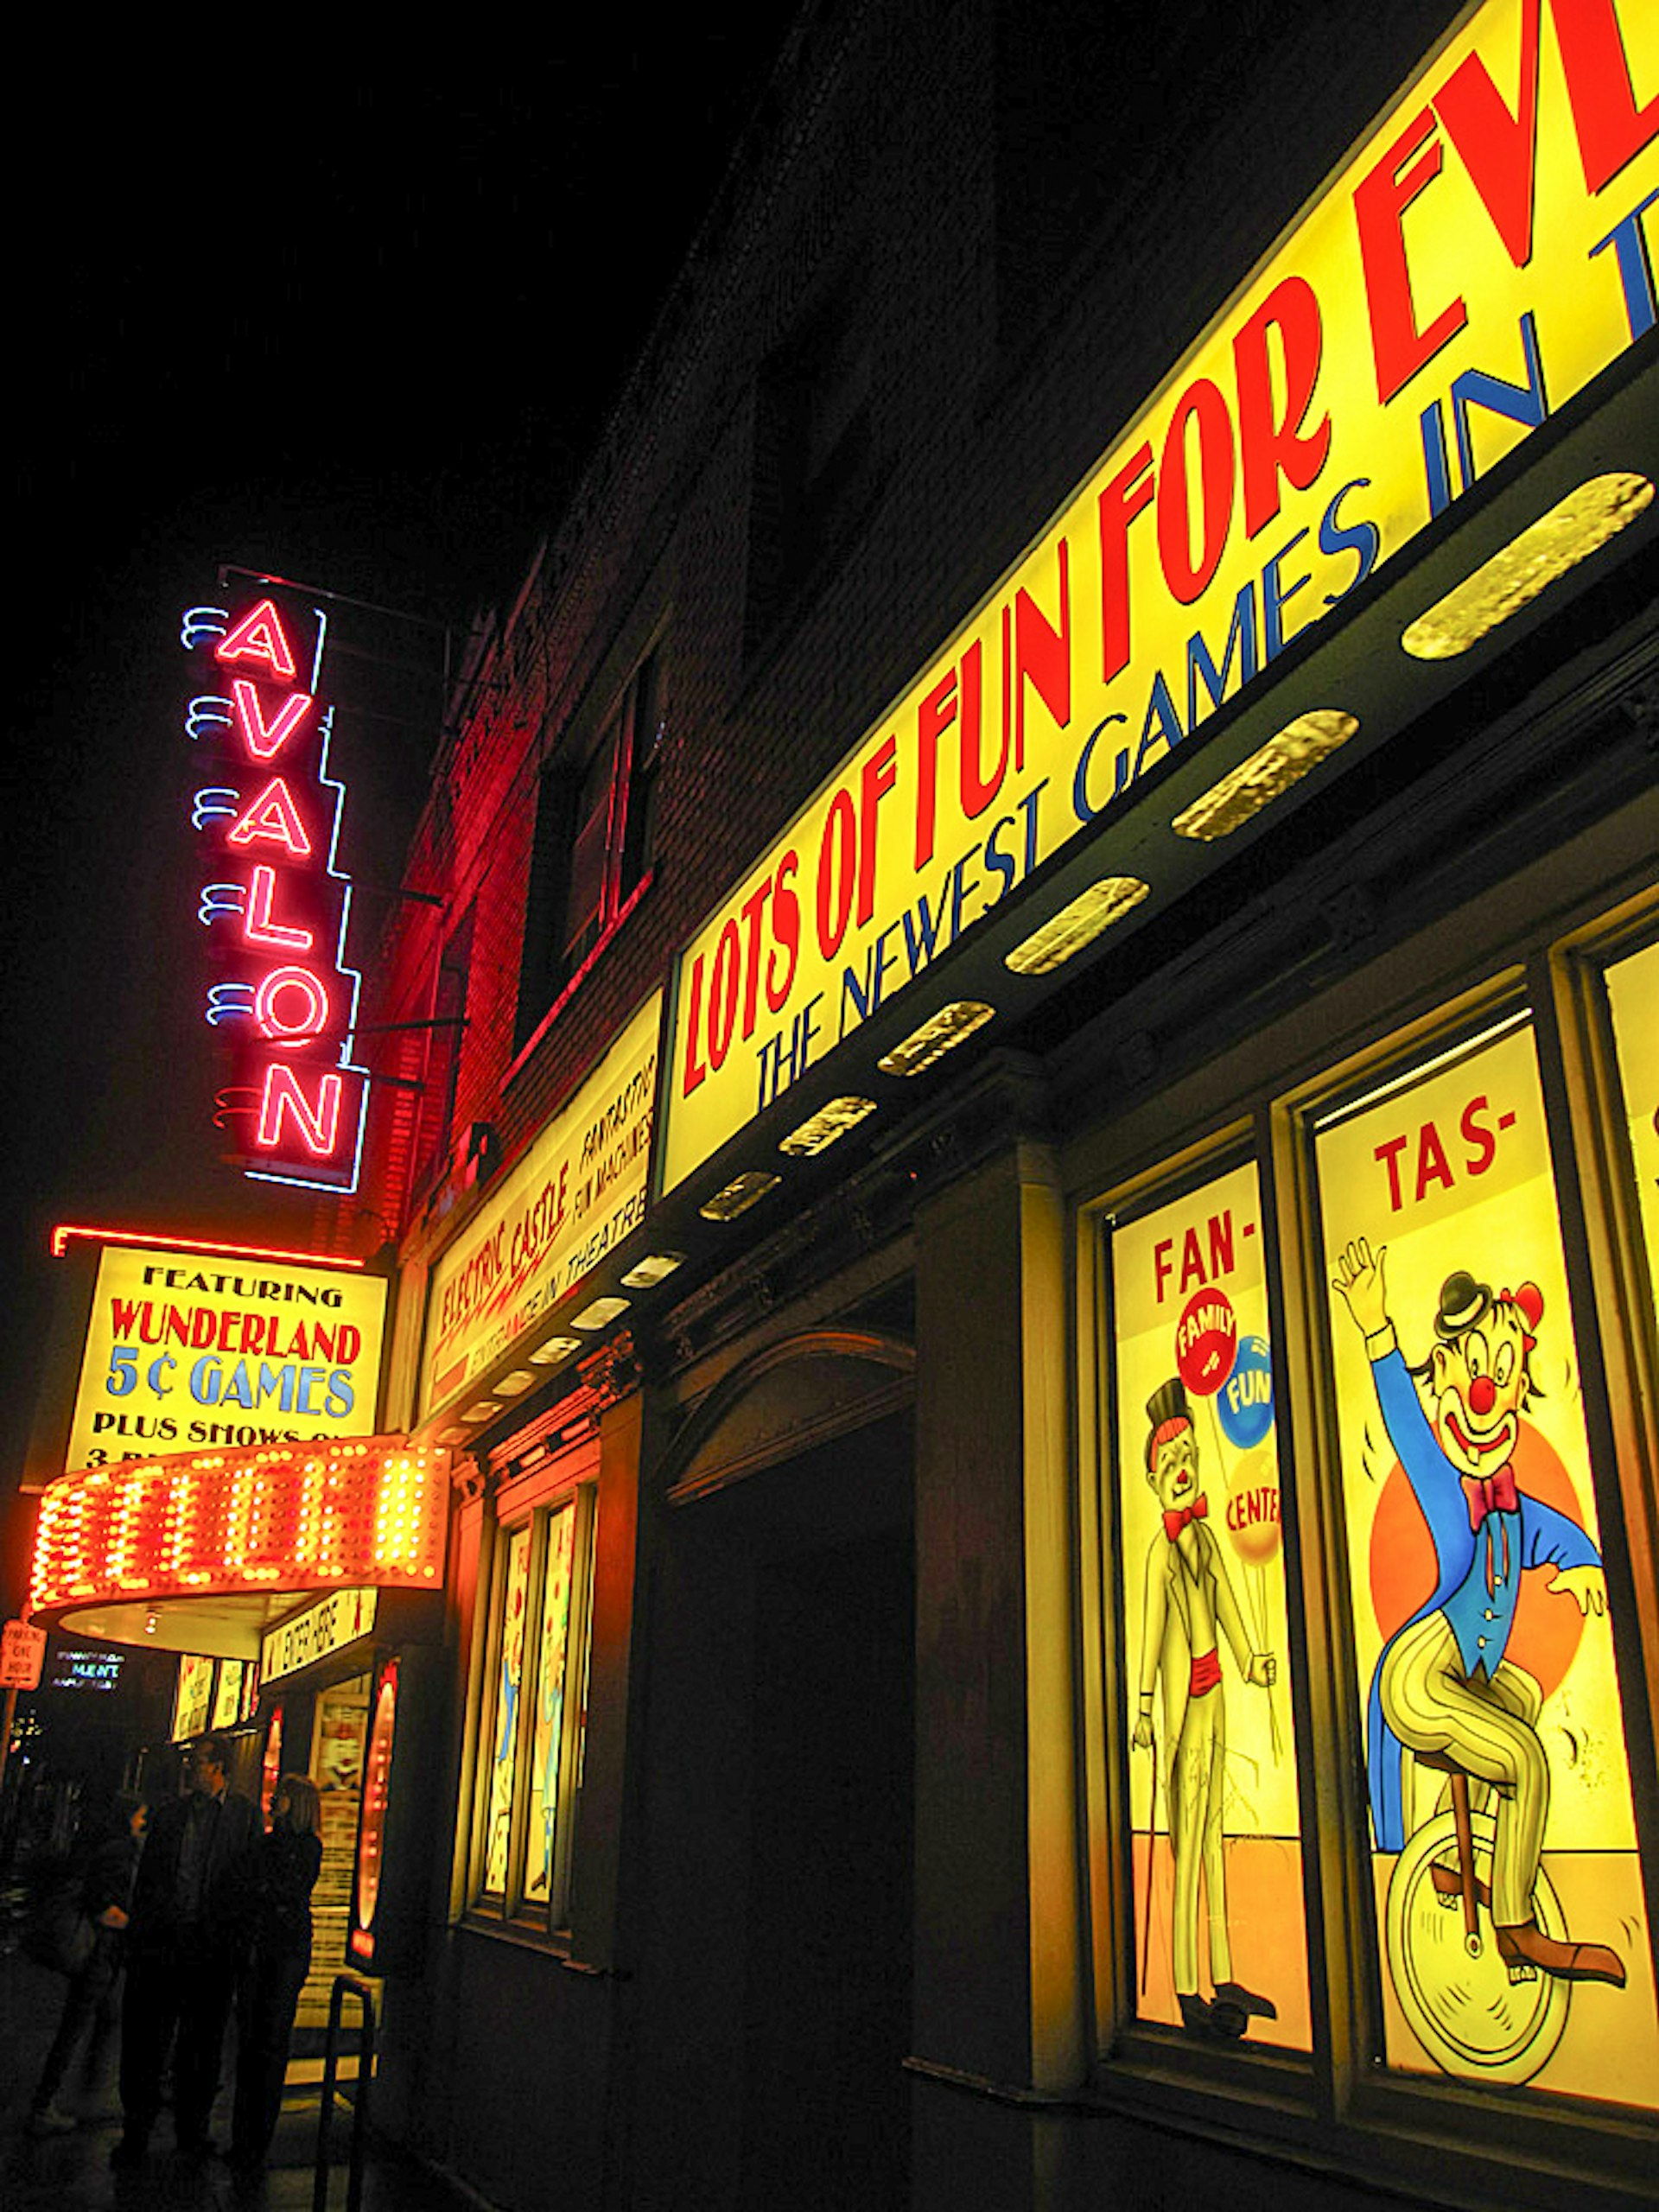 The facade of the Avalon Theater is pictured, with vivid bright yellow and red signs depicting clowns, and neon lights over the door.